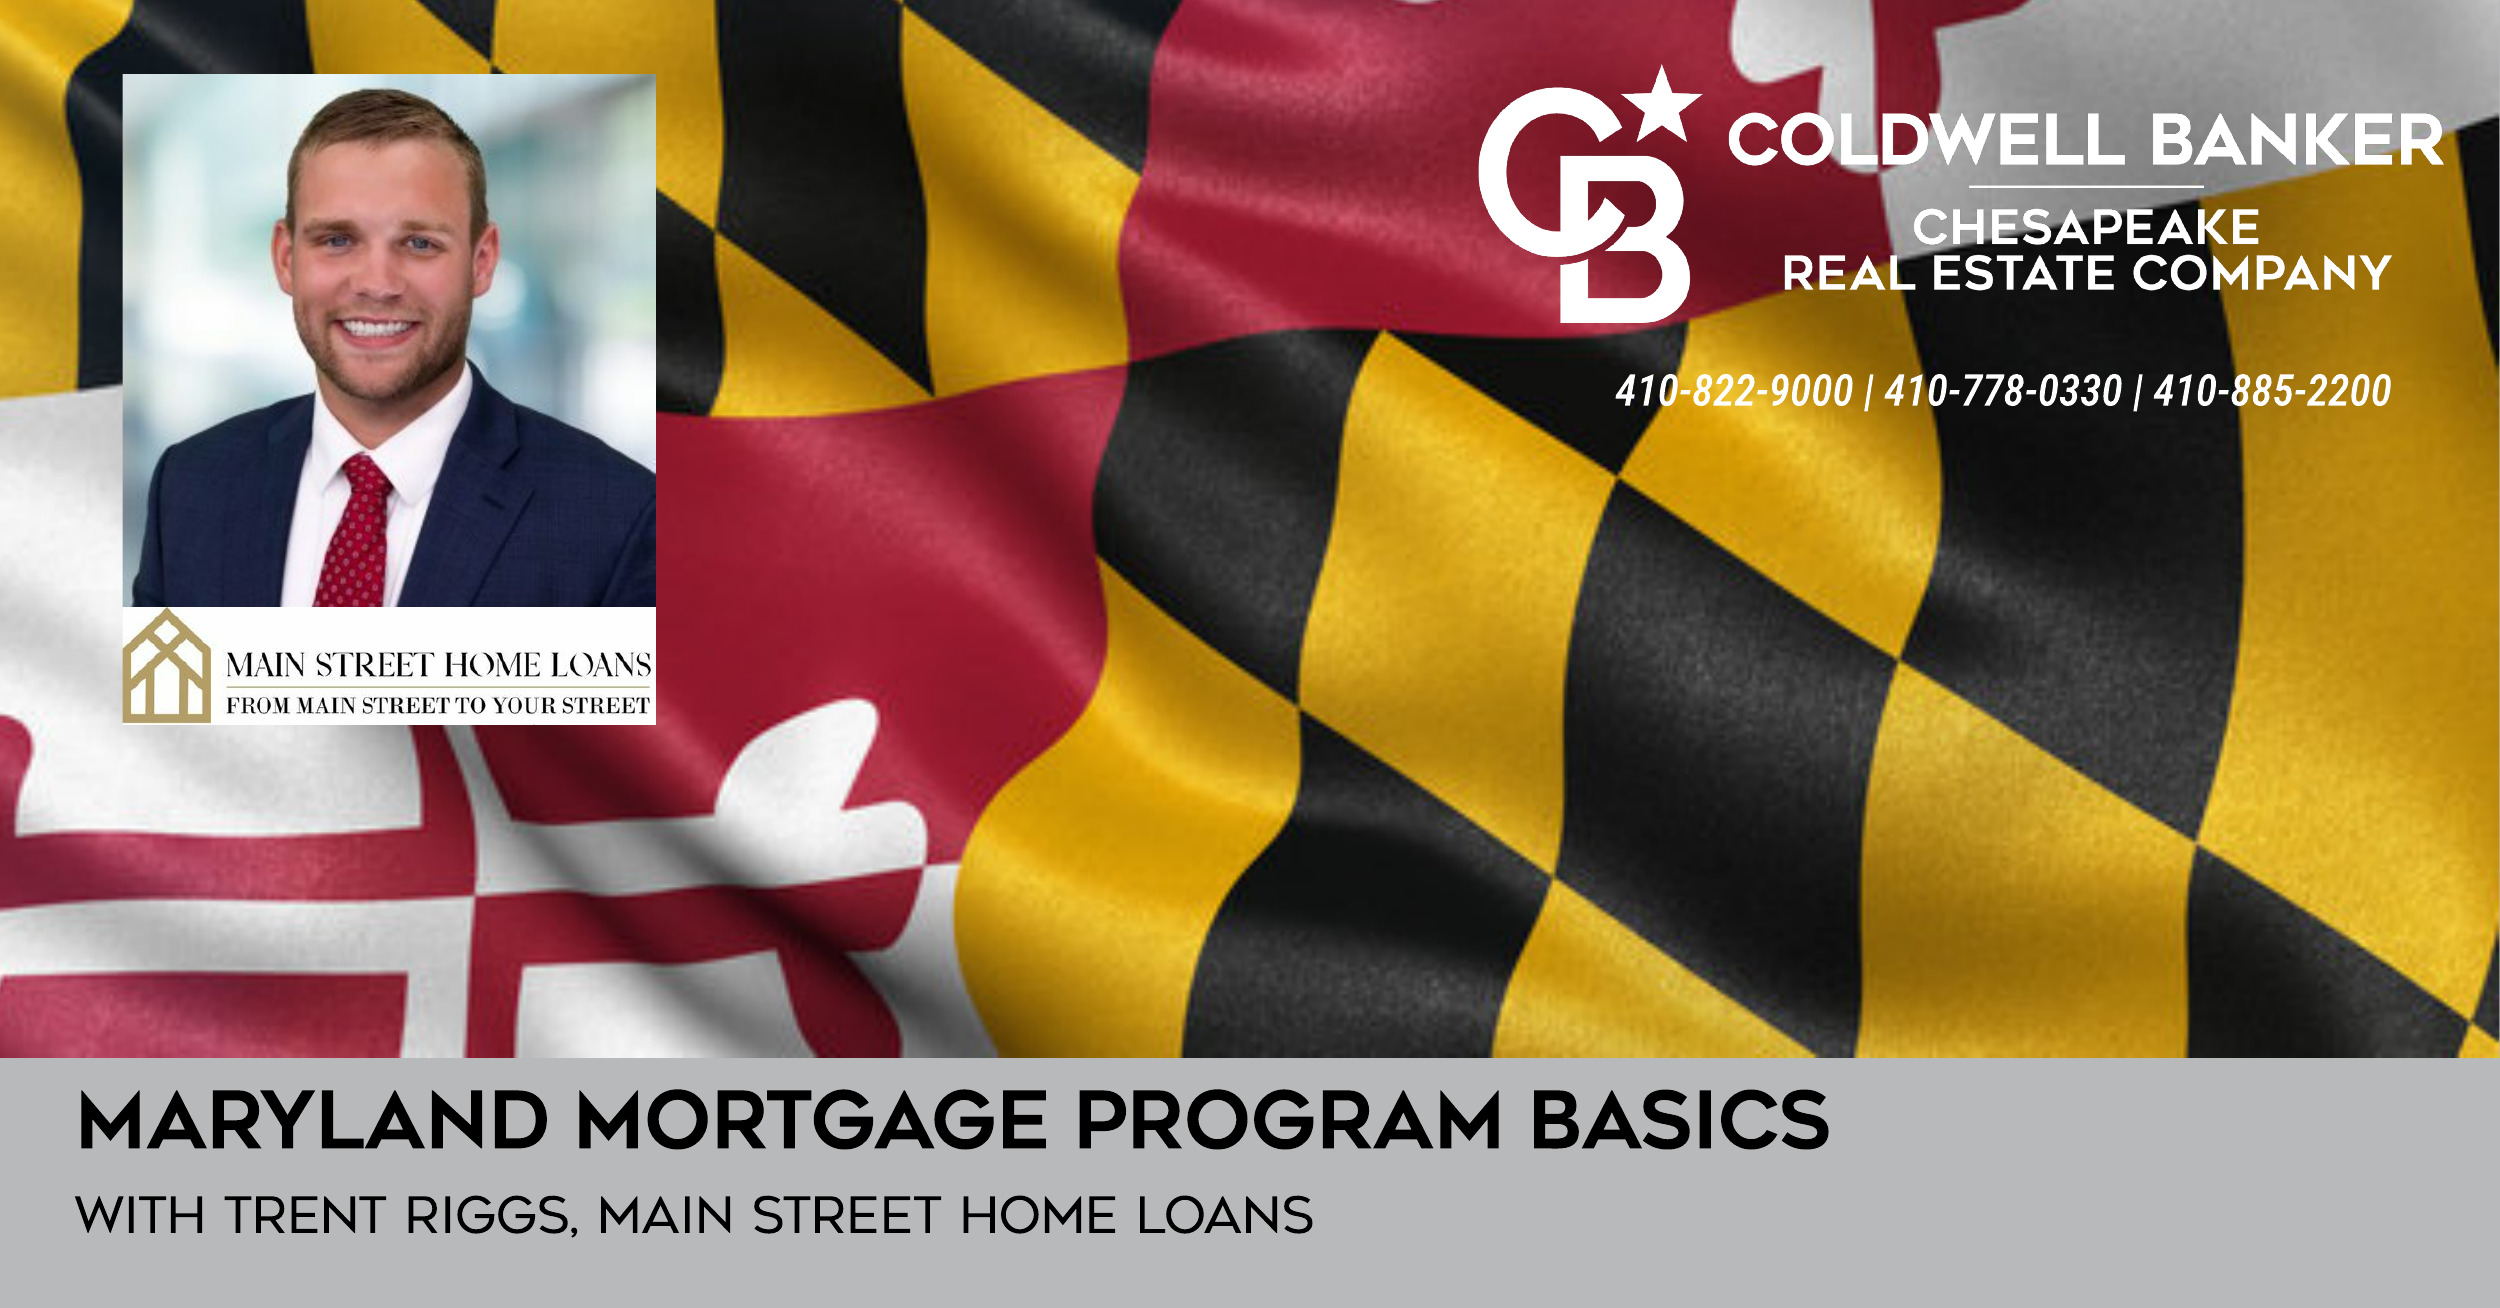 Maryland Mortgage Program with Trent Riggs